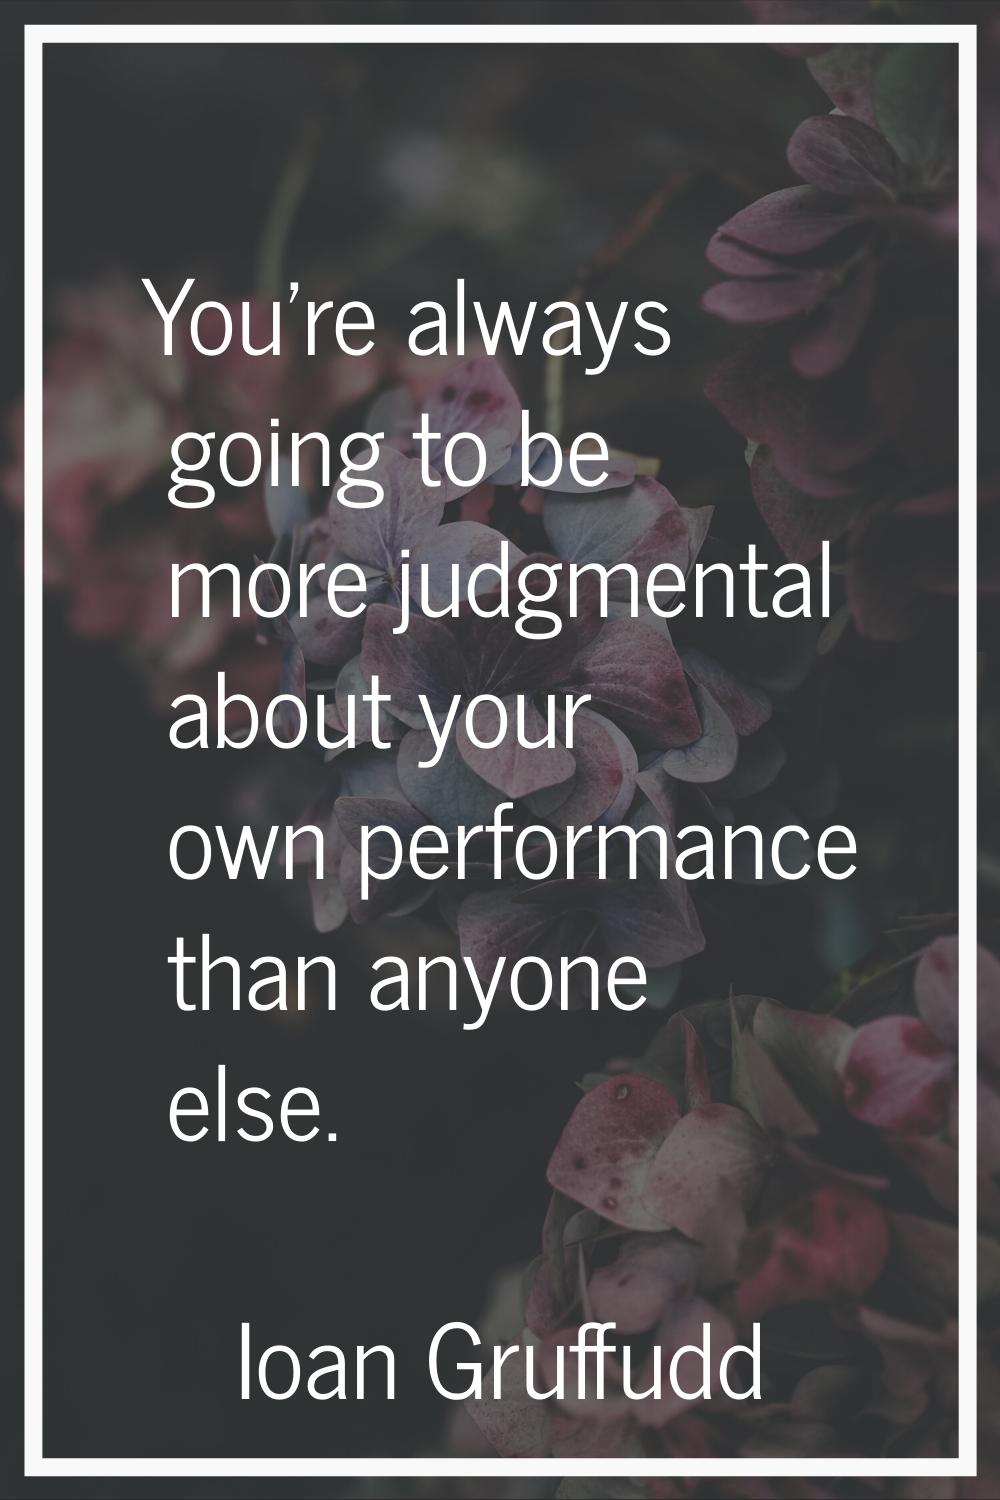 You're always going to be more judgmental about your own performance than anyone else.